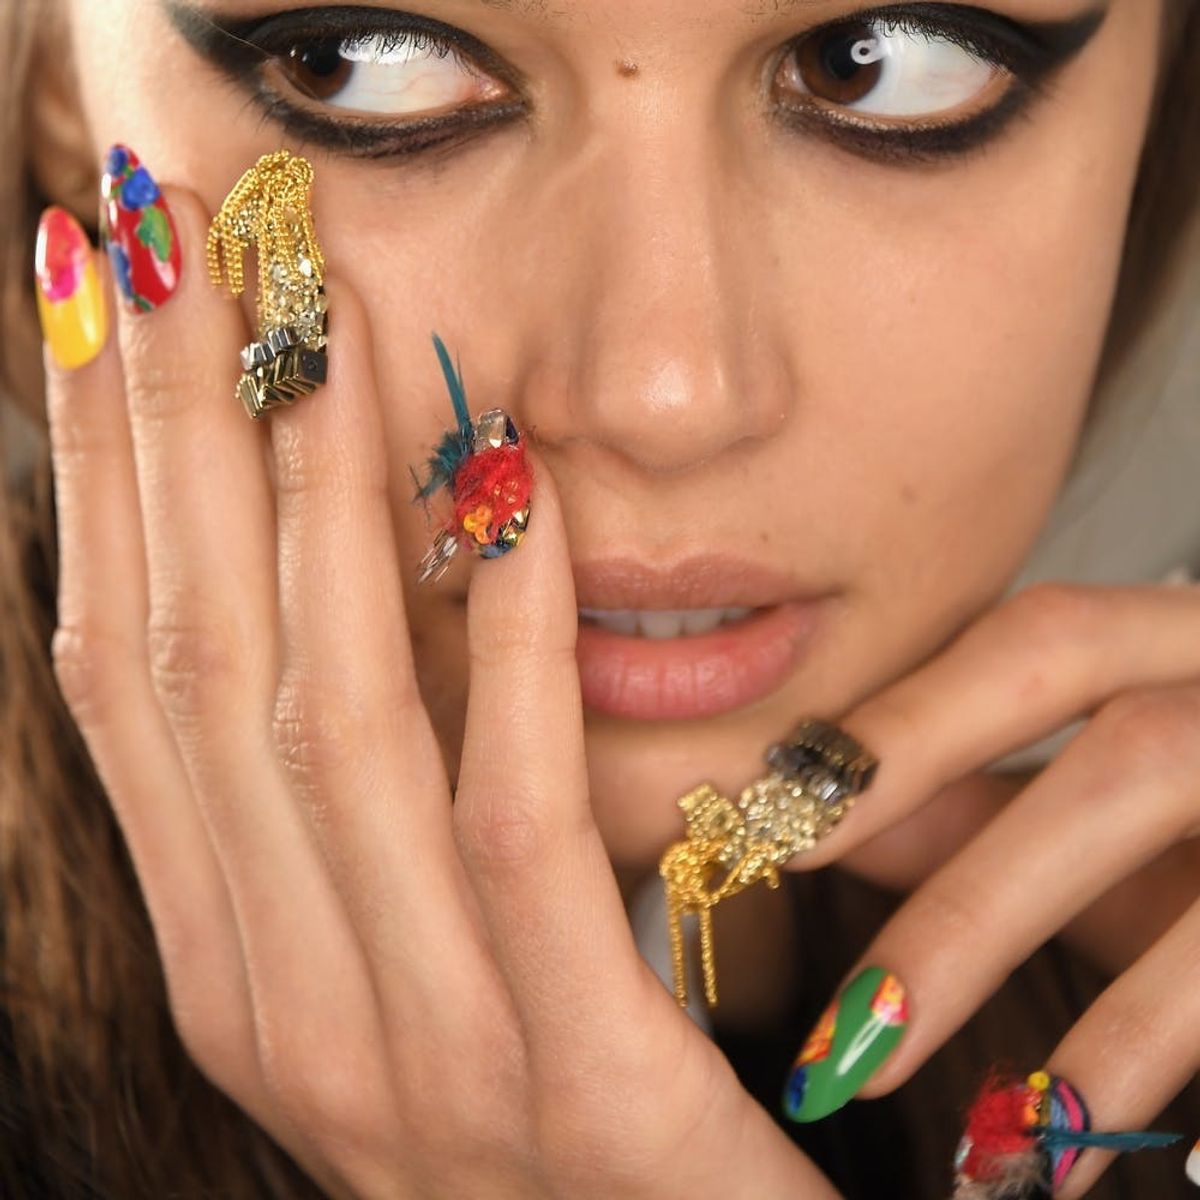 The 10 Most OTT Manicures and Nail Art from NYFW 2017